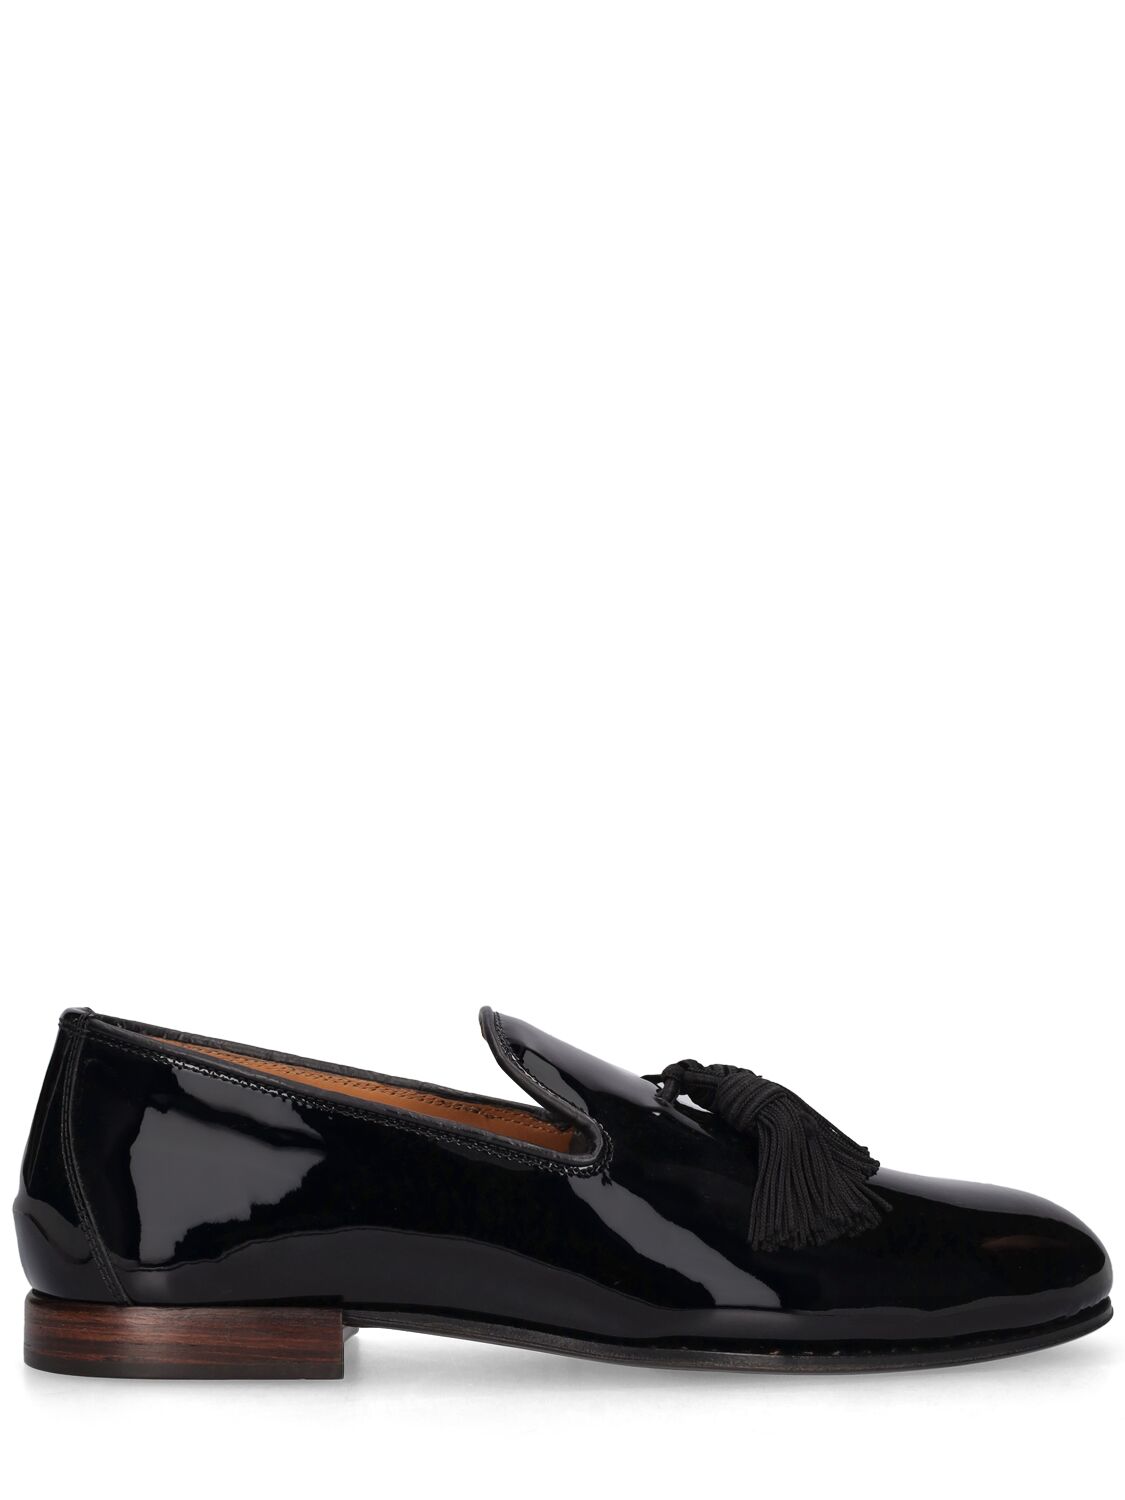 Tom Ford Nicolas Tasselled Patent-leather Loafers In Black